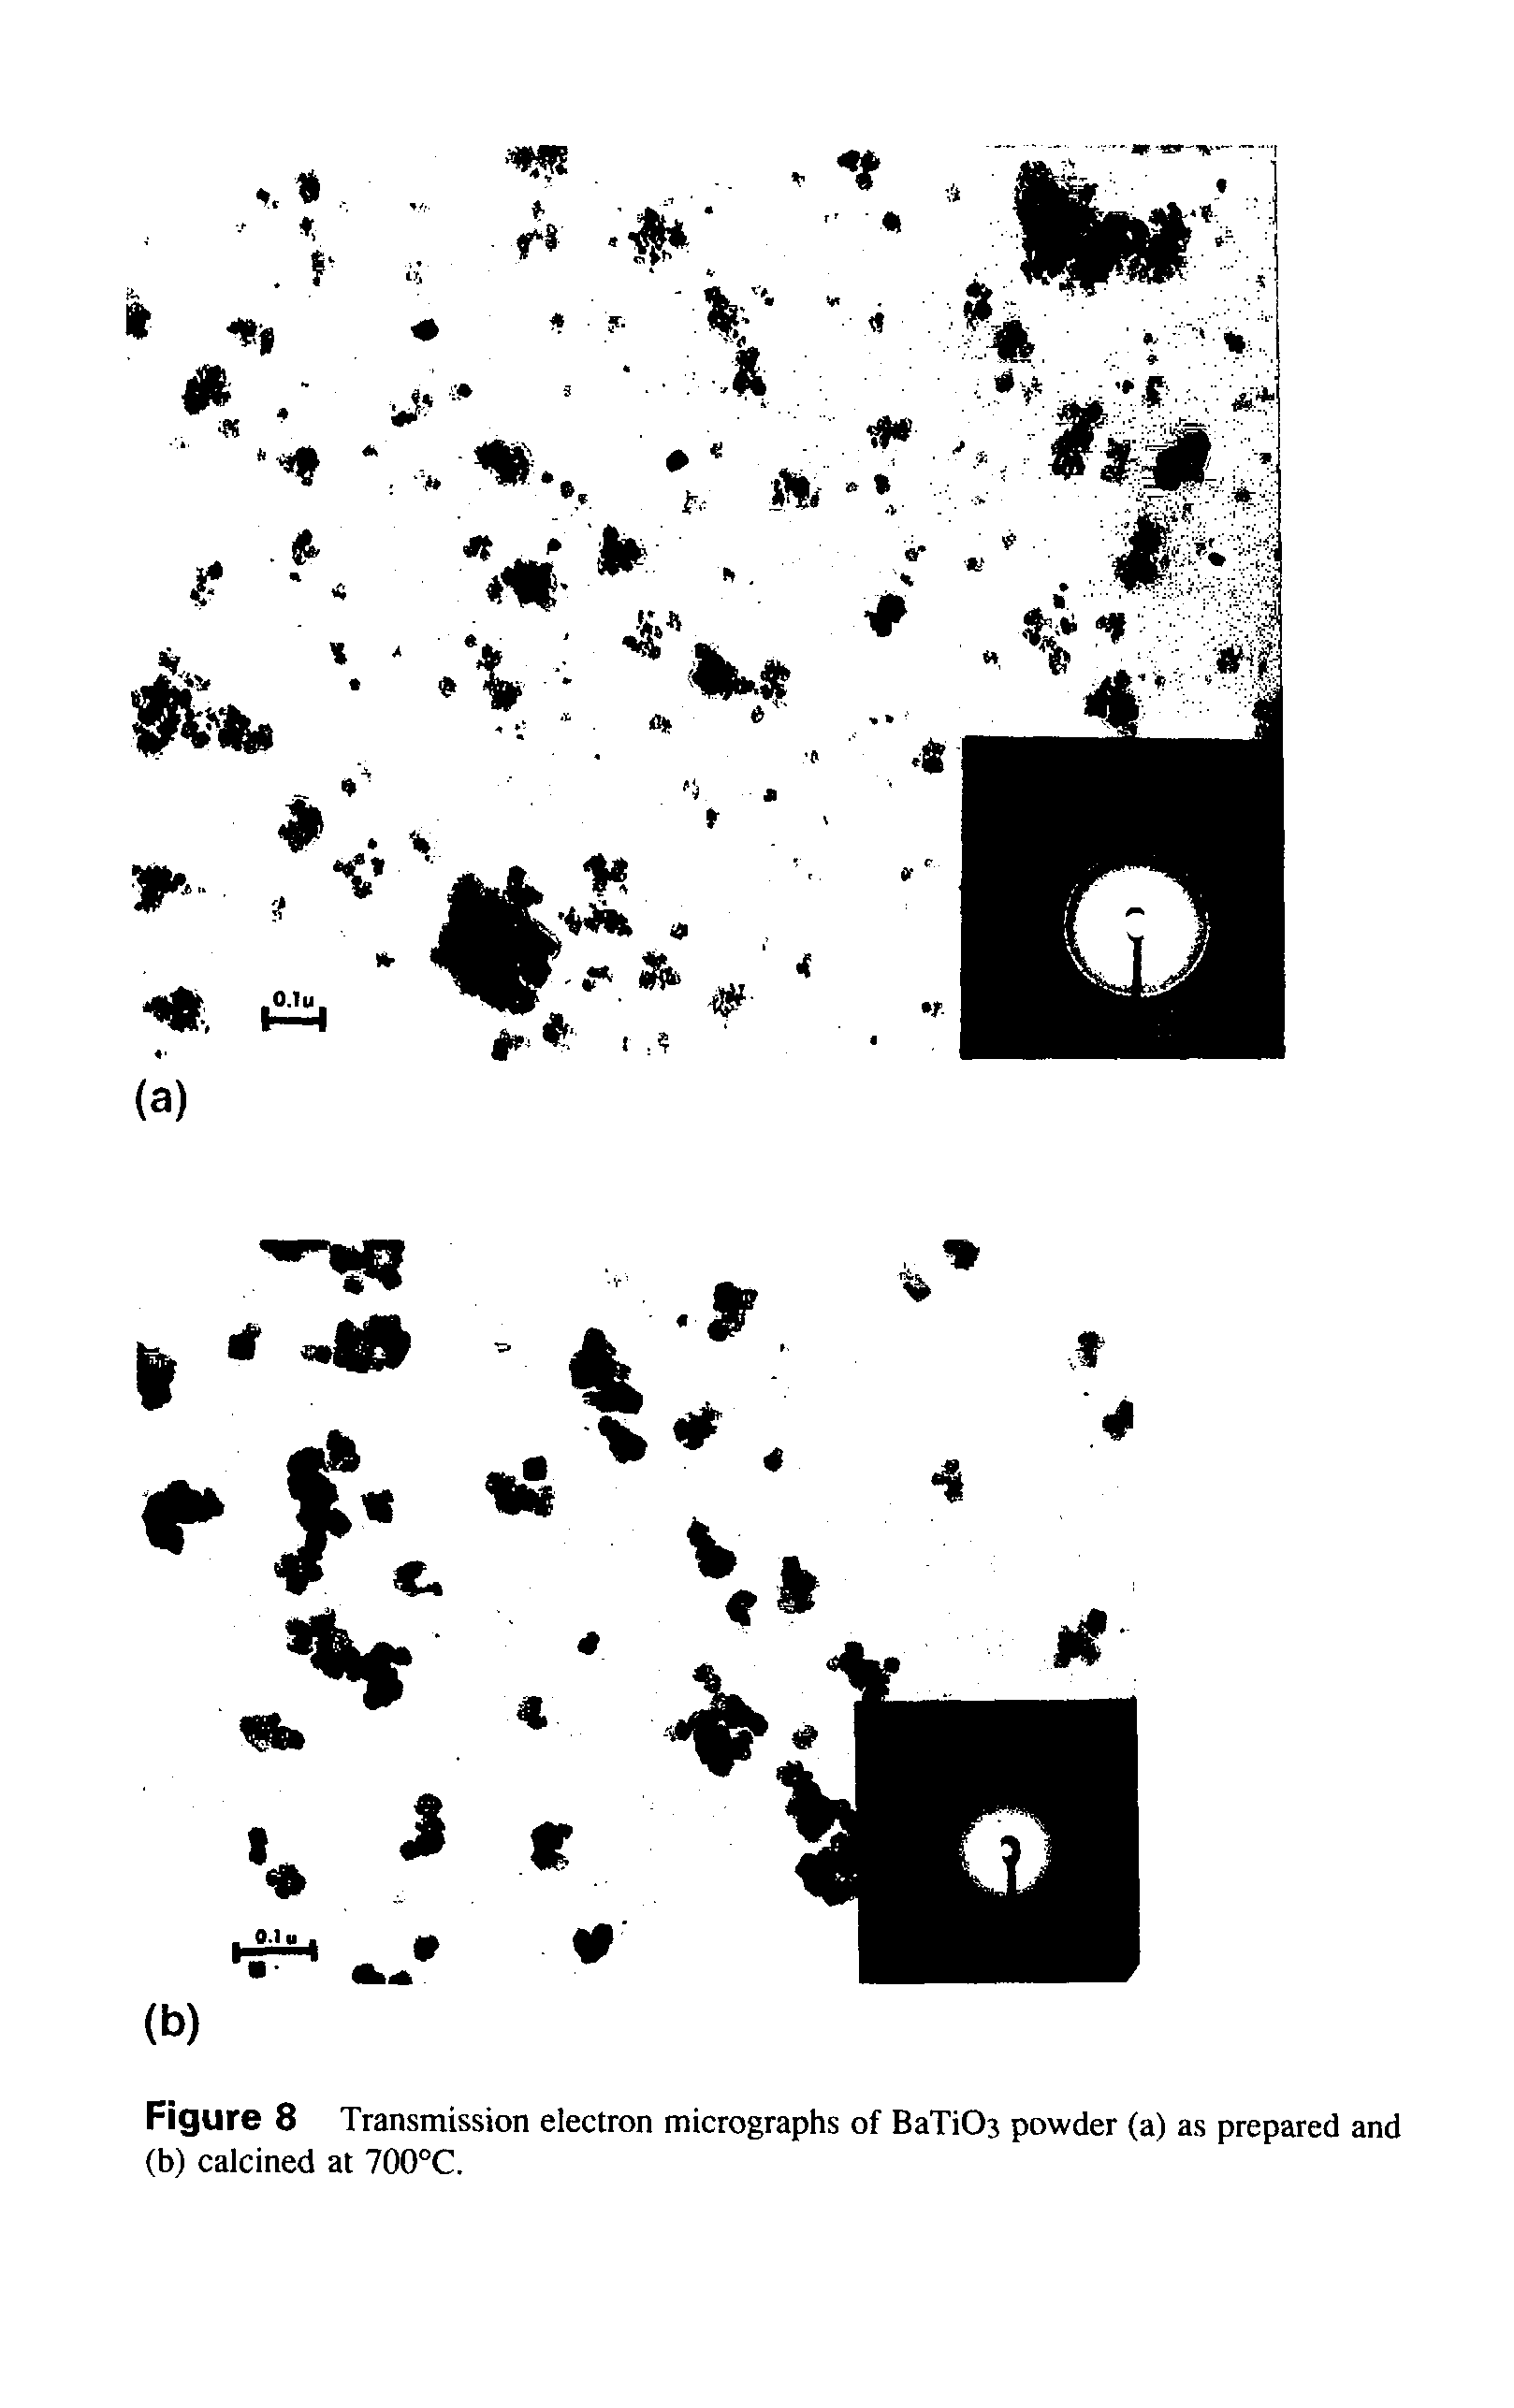 Figure 8 Transmission electron micrographs of BaTiOs powder (a) as prepared and (b) calcined at 700°C.